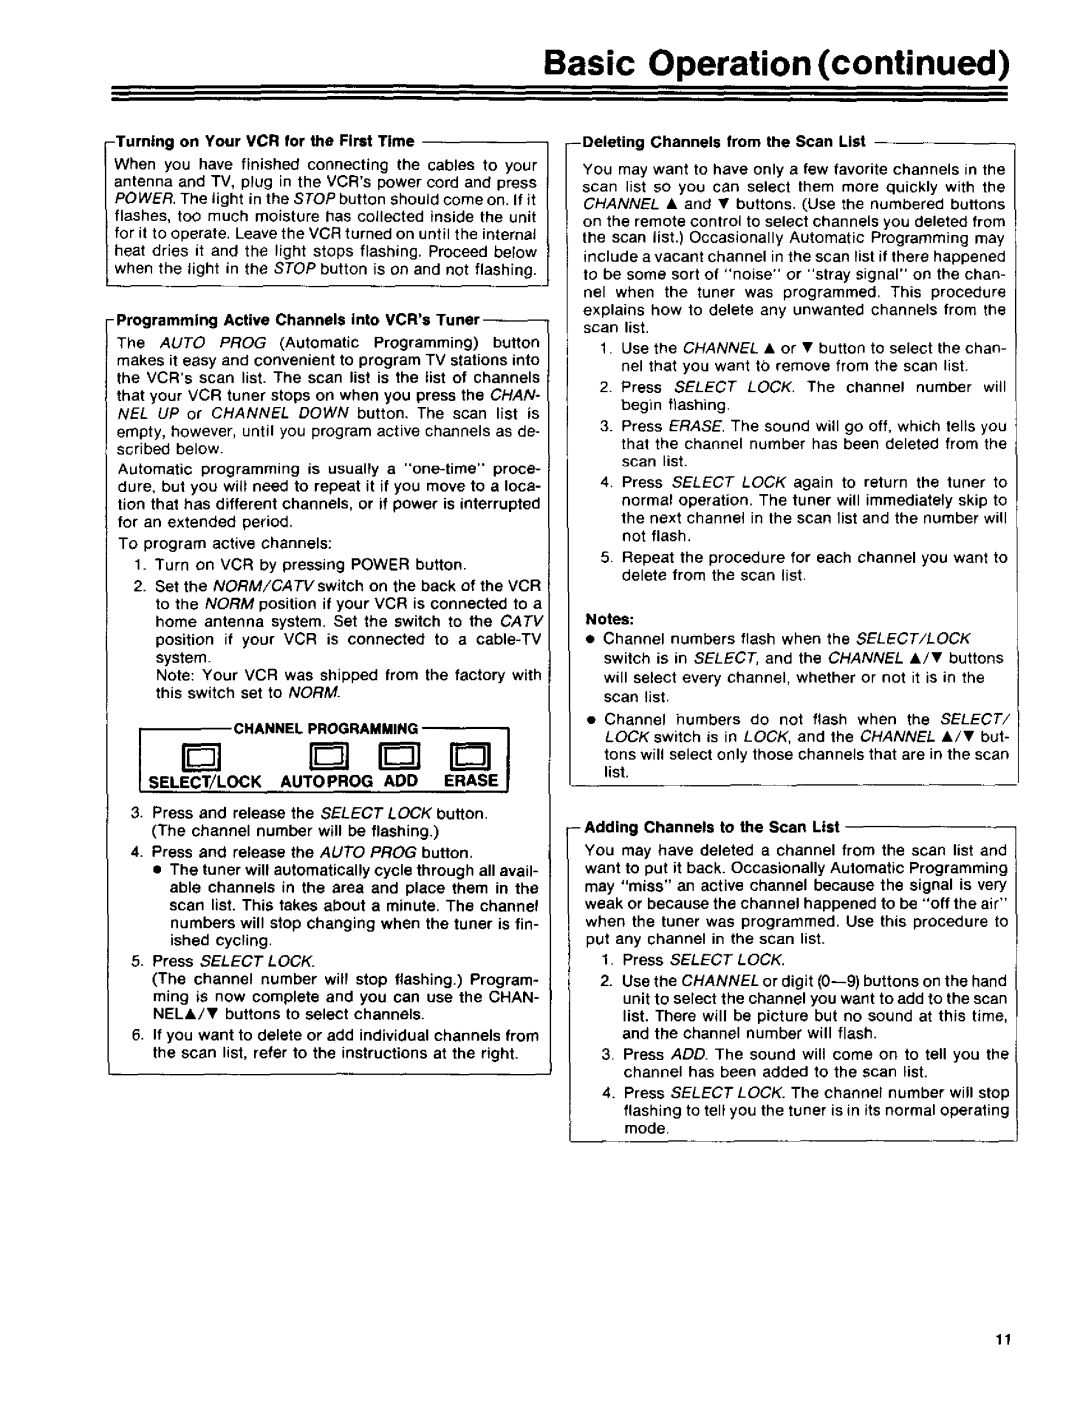 RCA 390 owner manual Basic Operation continued 